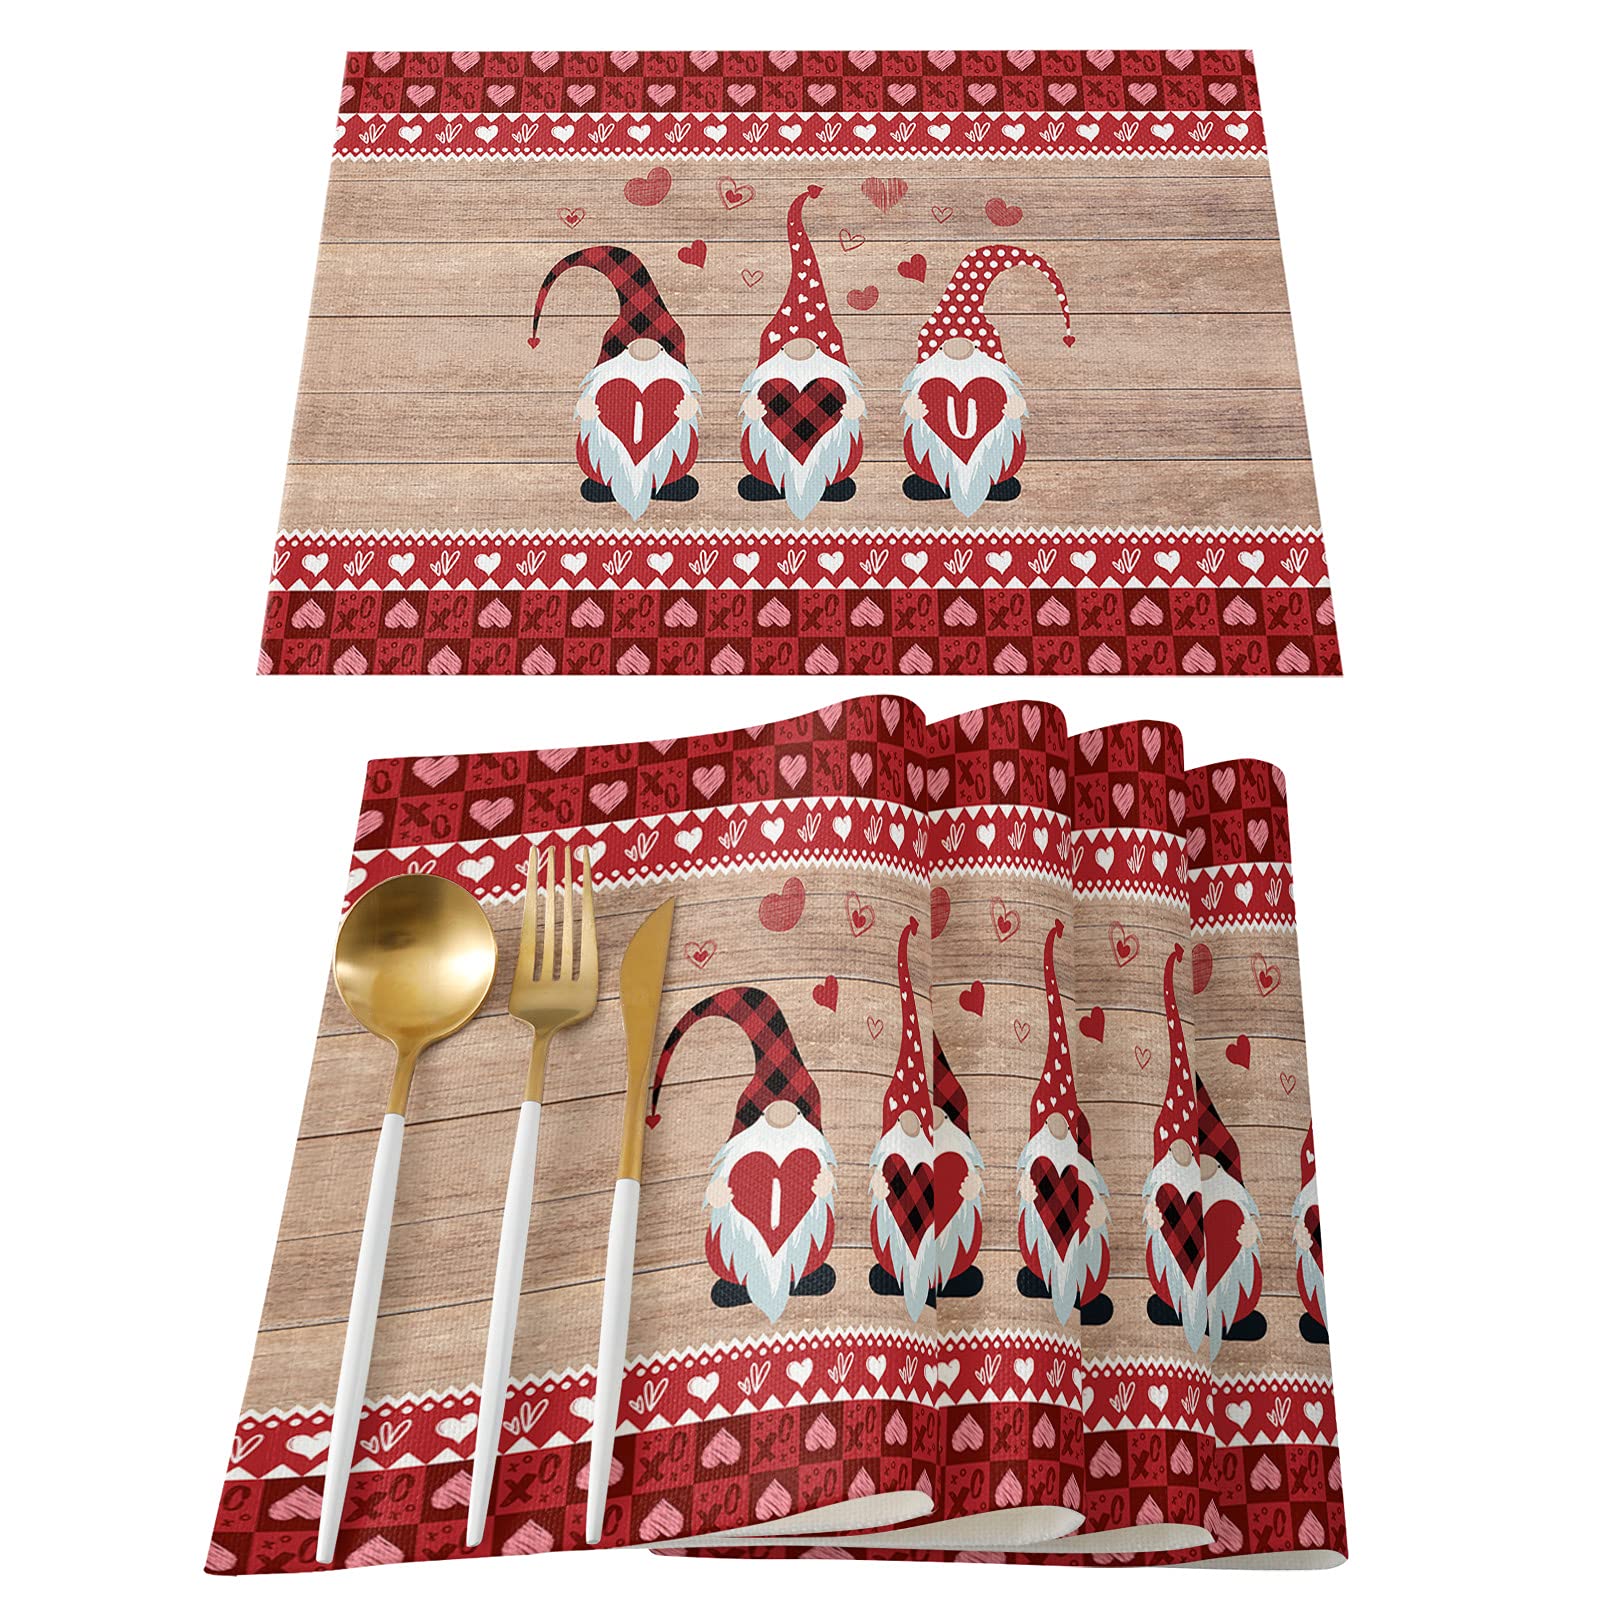 I Love You - Adorable Gnome Themed Placemat